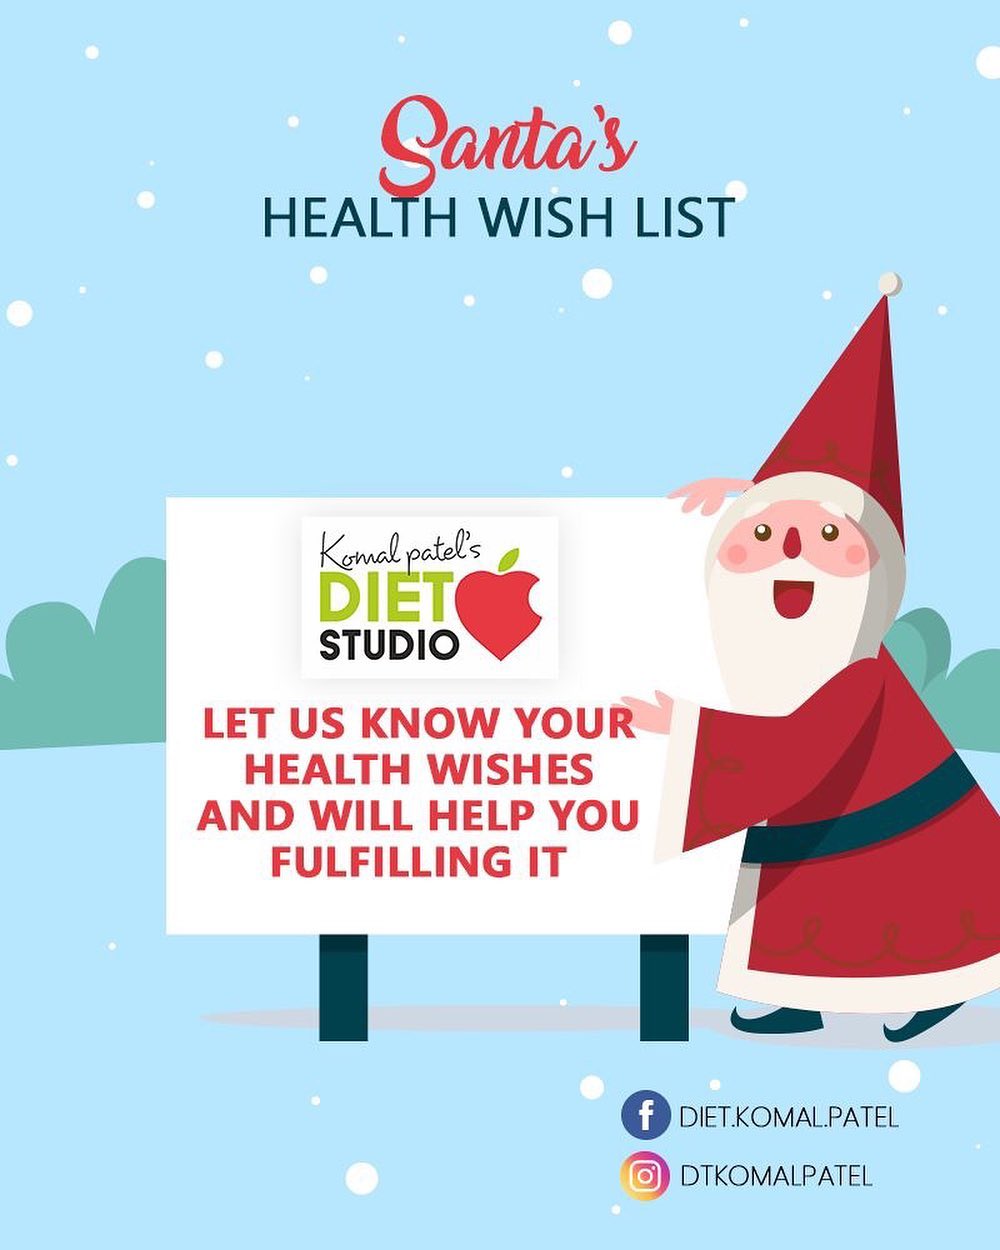 Let us know your health wishes and will help you fulfilling it

#komalpatel #diet #goodfood #eathealthy #goodhealth #dietstudio #dietitian